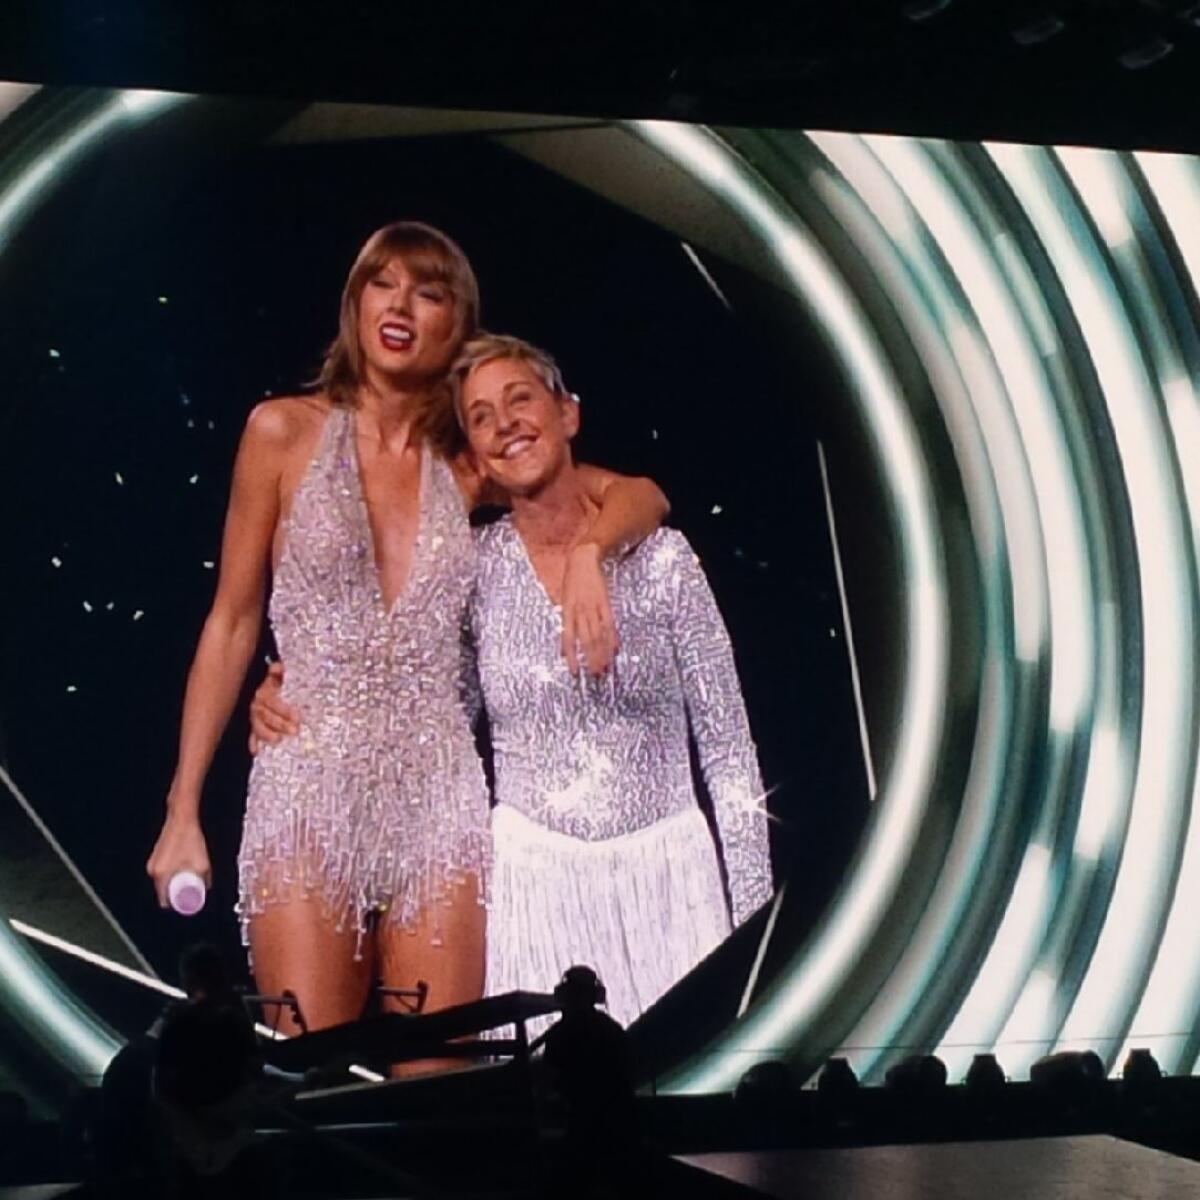 Taylor Swift, left, was joined by friend and talk-show host Ellen DeGeneres during her tour stop on Monday at Staples Center in Los Angeles.